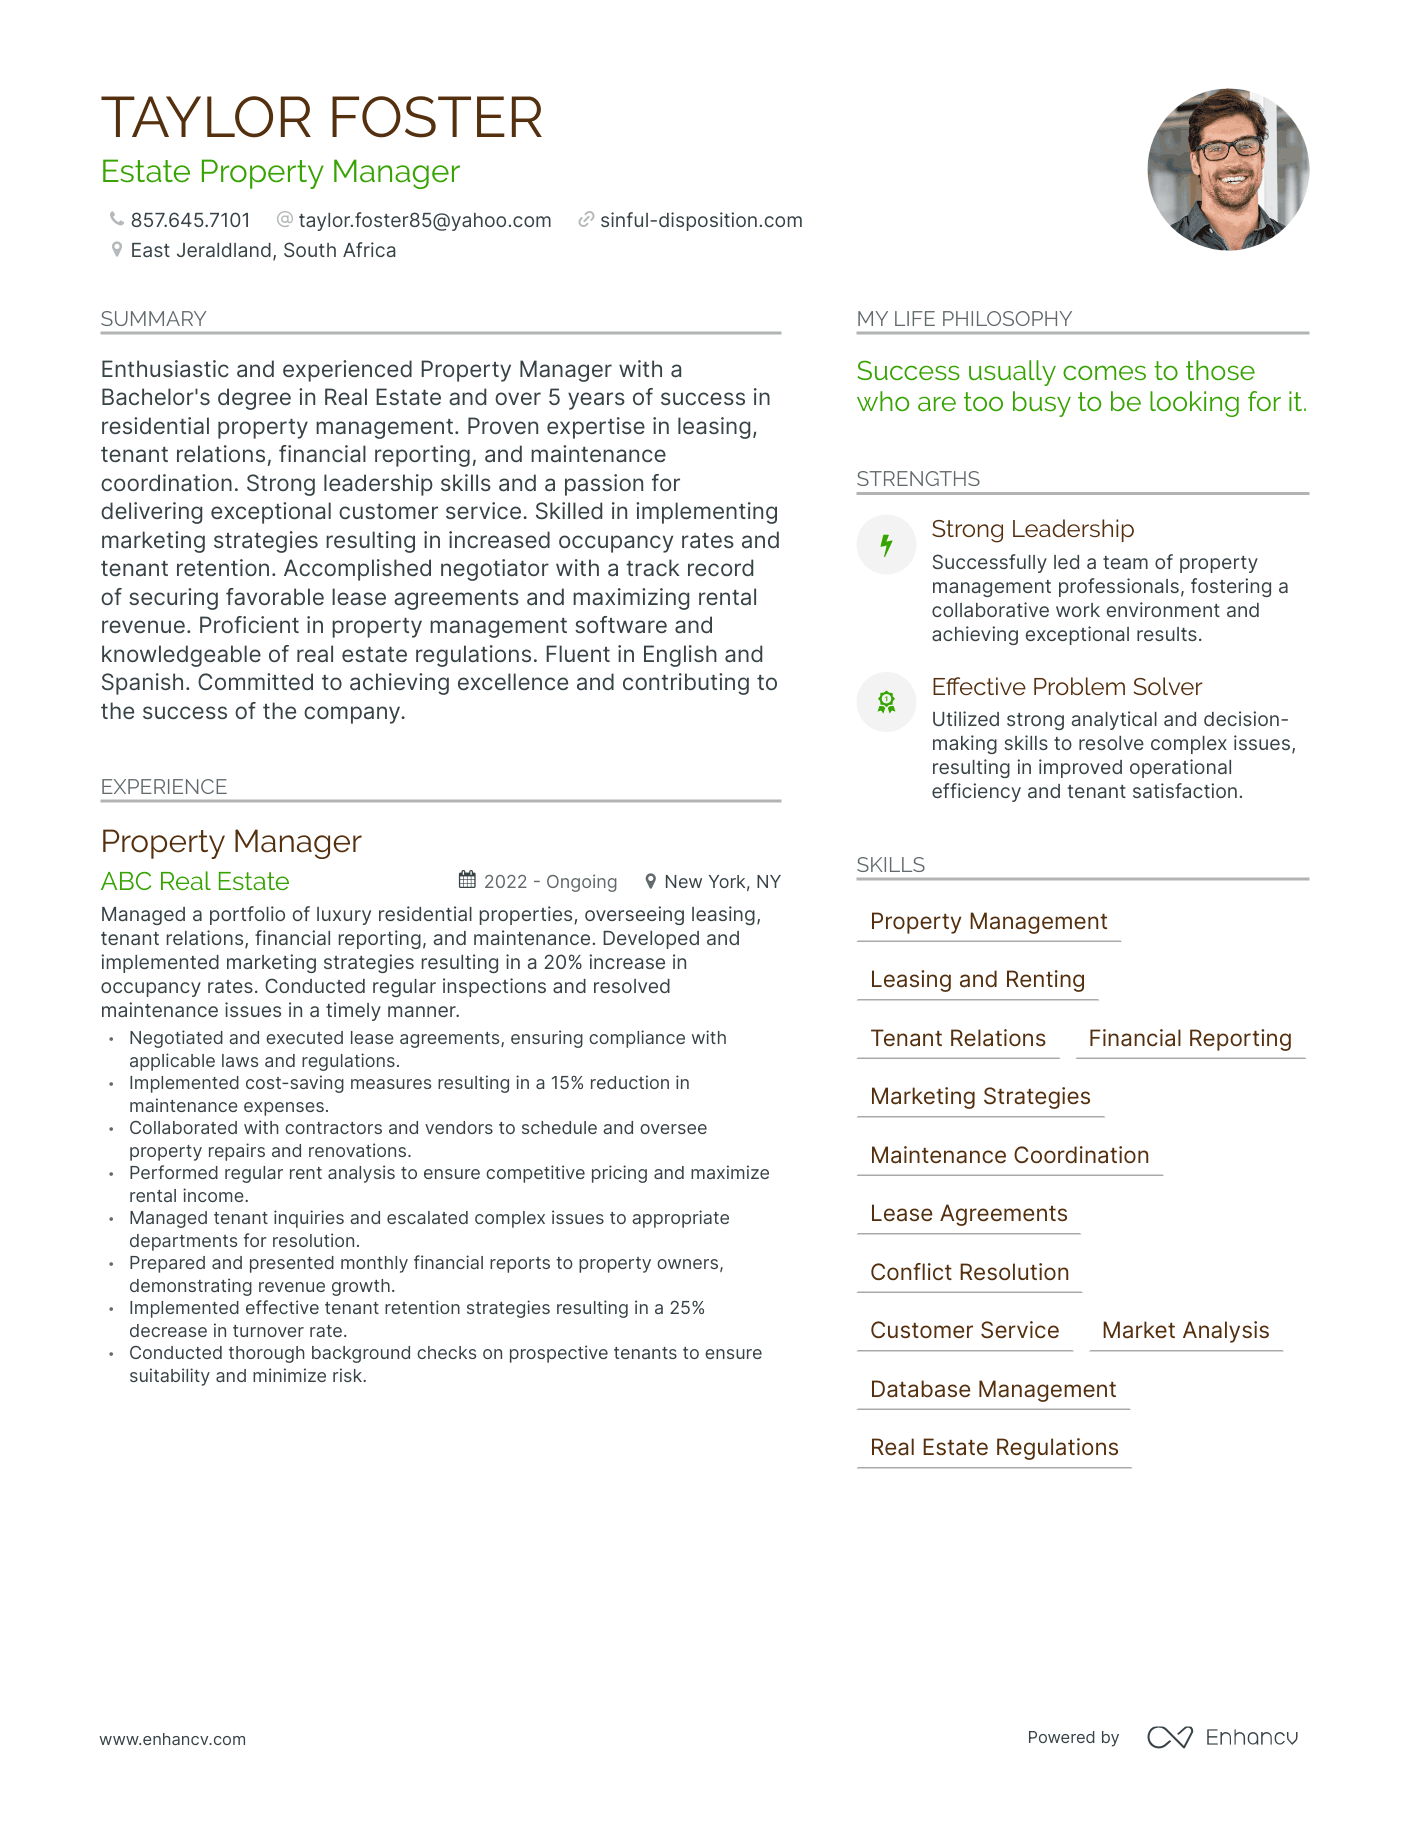 Estate Property Manager resume example